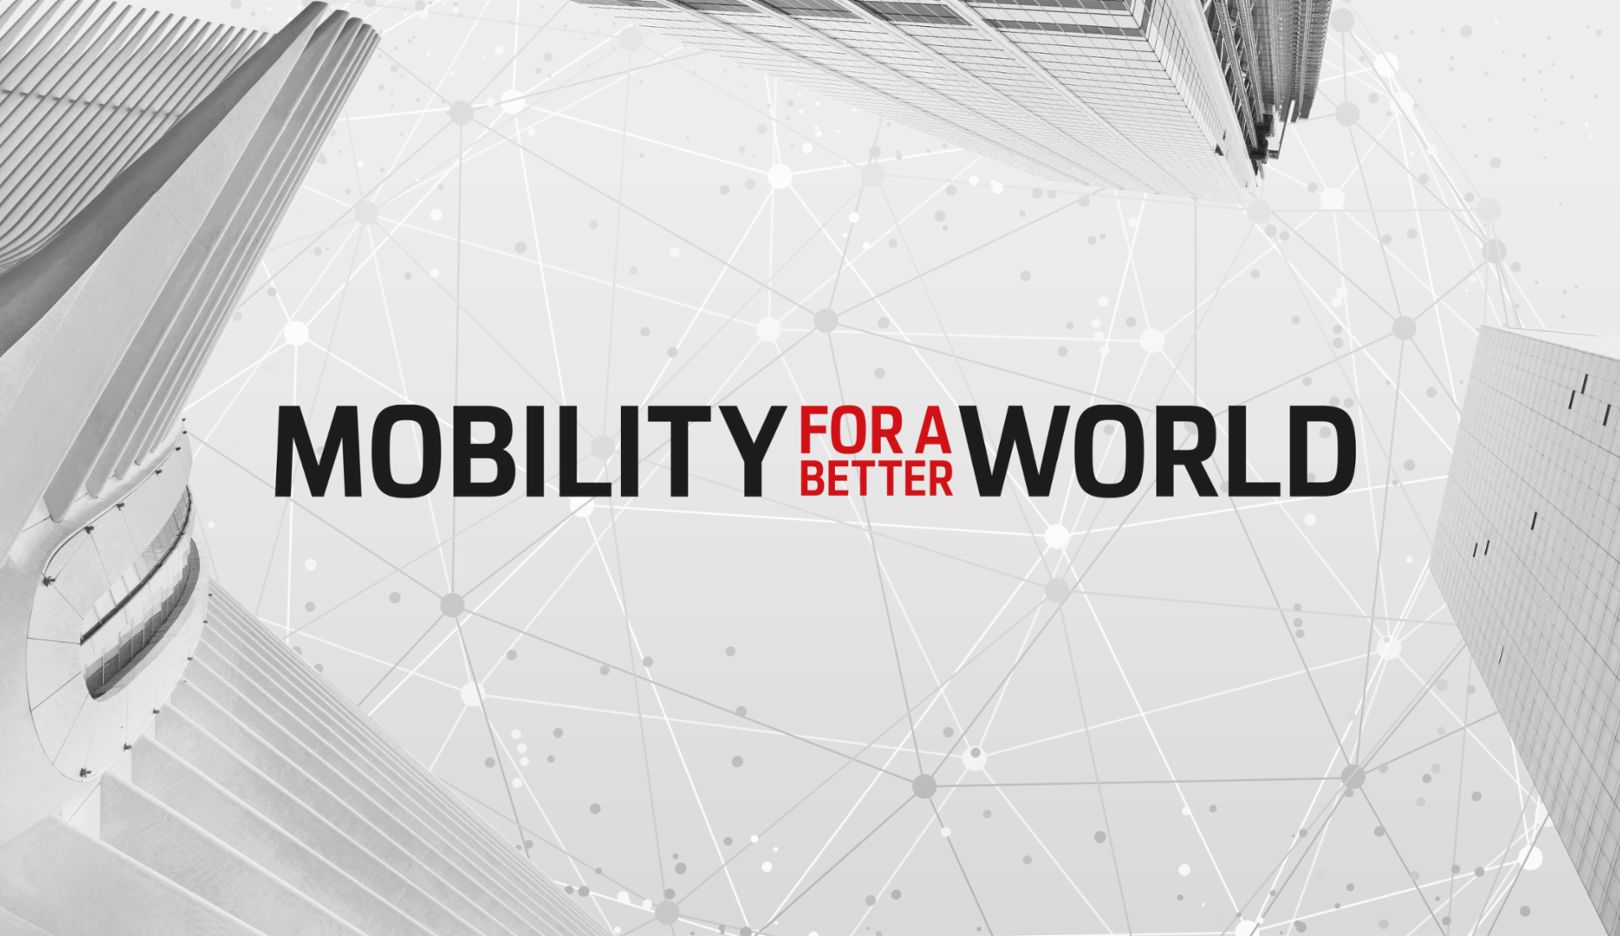  Mobility for a better world - apply now!